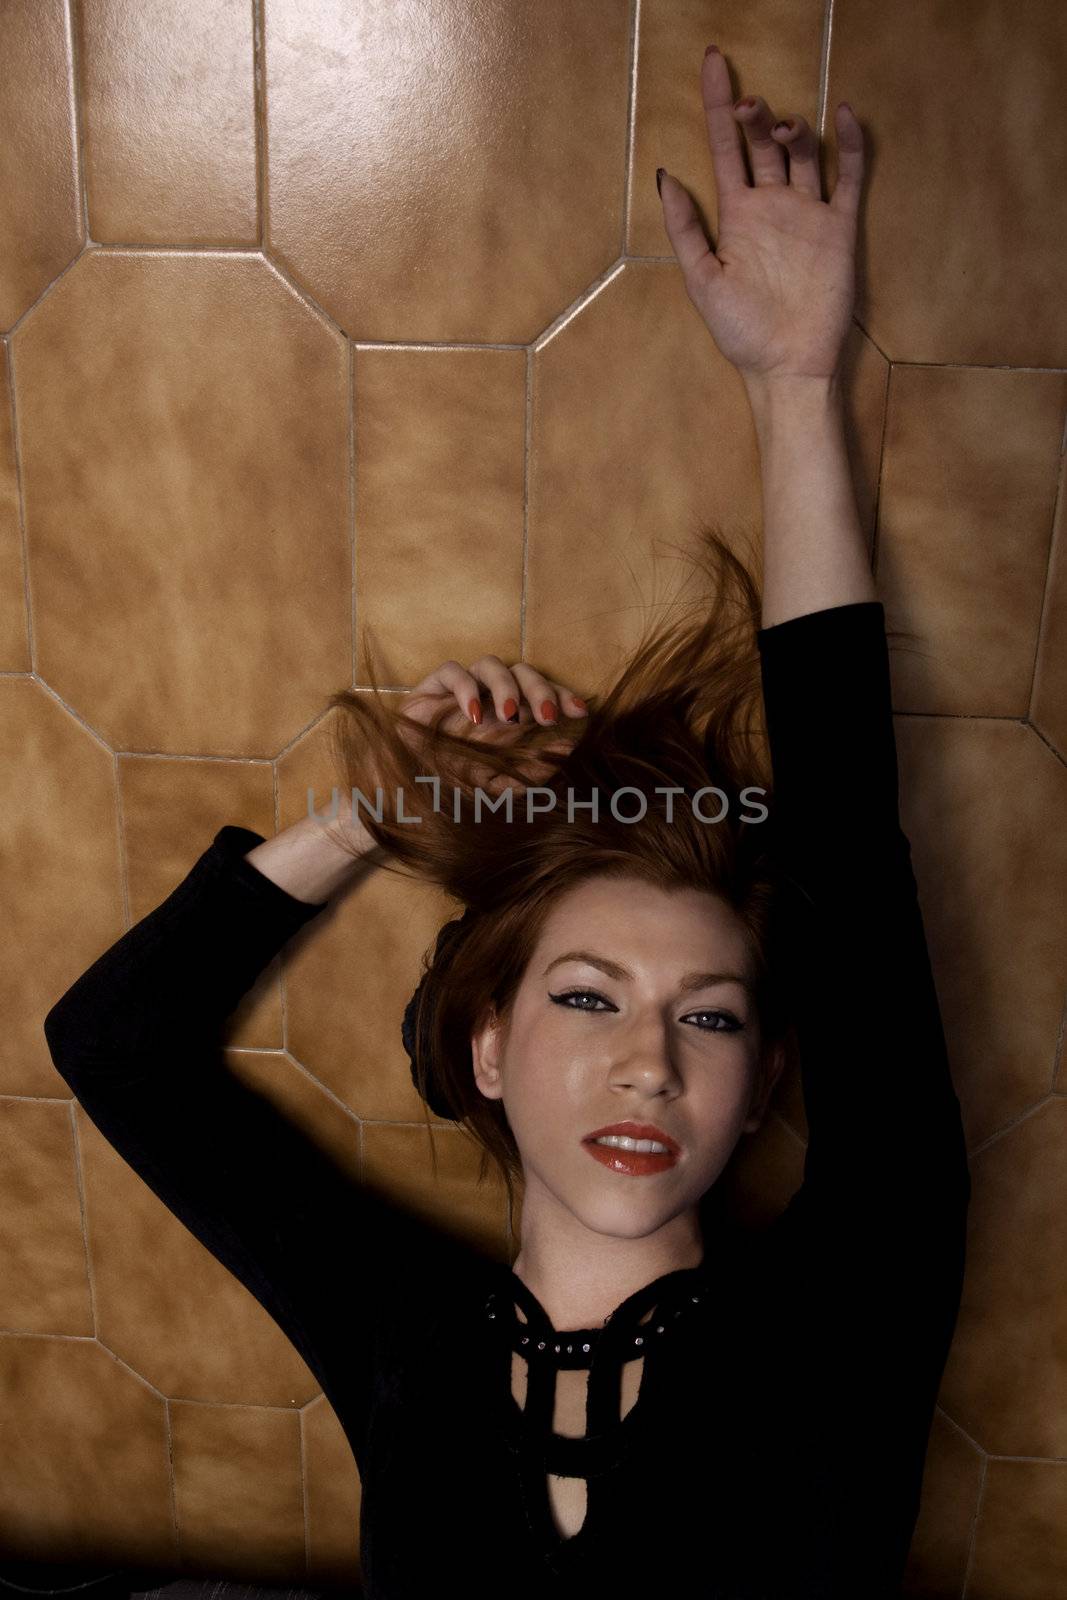 View of a beautiful woman on a sensual pose on the floor.